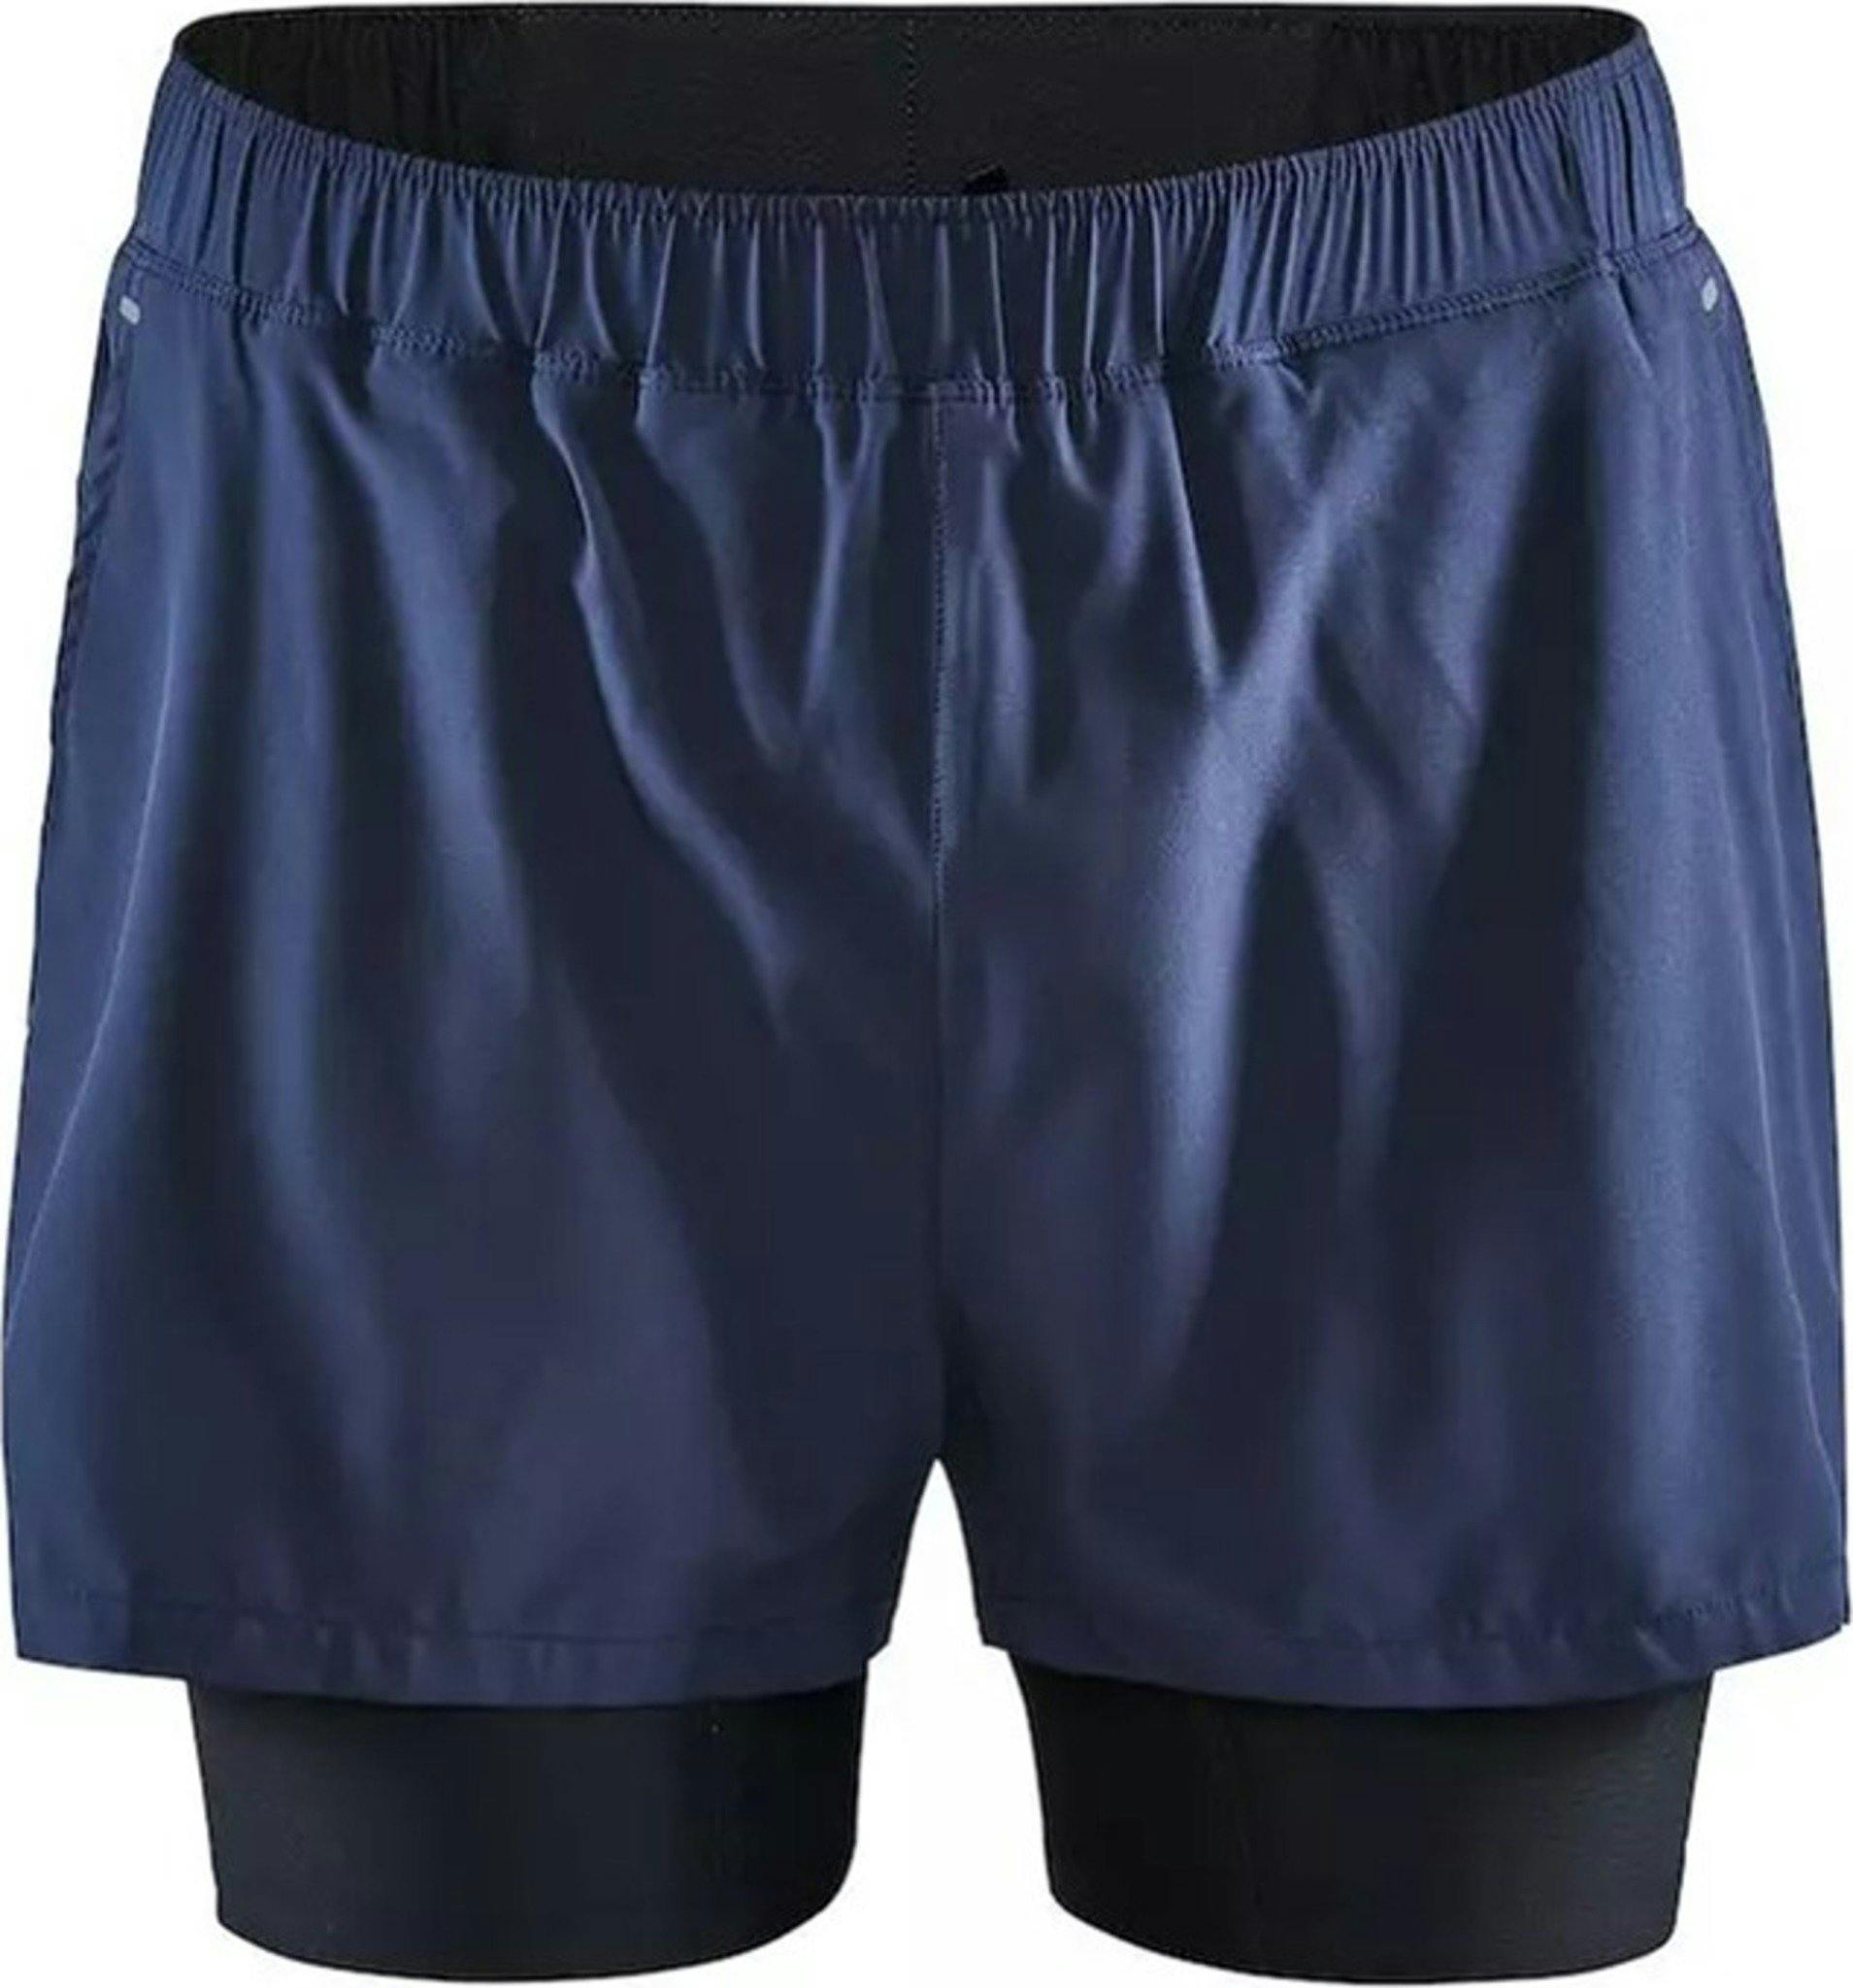 Product image for ADV Essence 2-In-1 Stretch Shorts - Men's